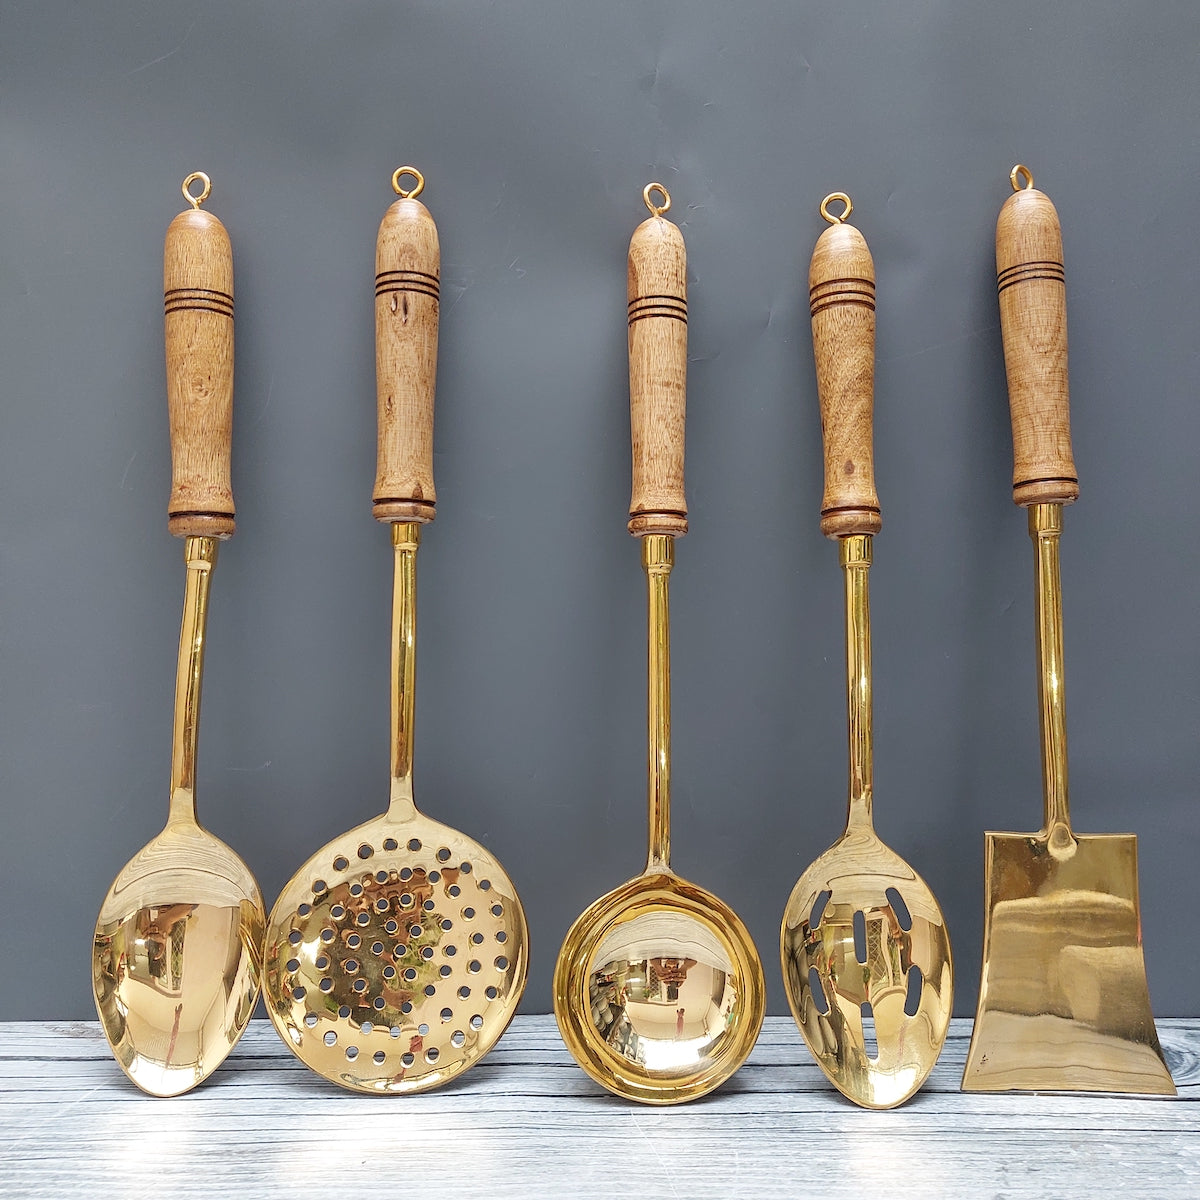 Antique French Cooking Utensils Brass Set of 5 With Wooden Handles